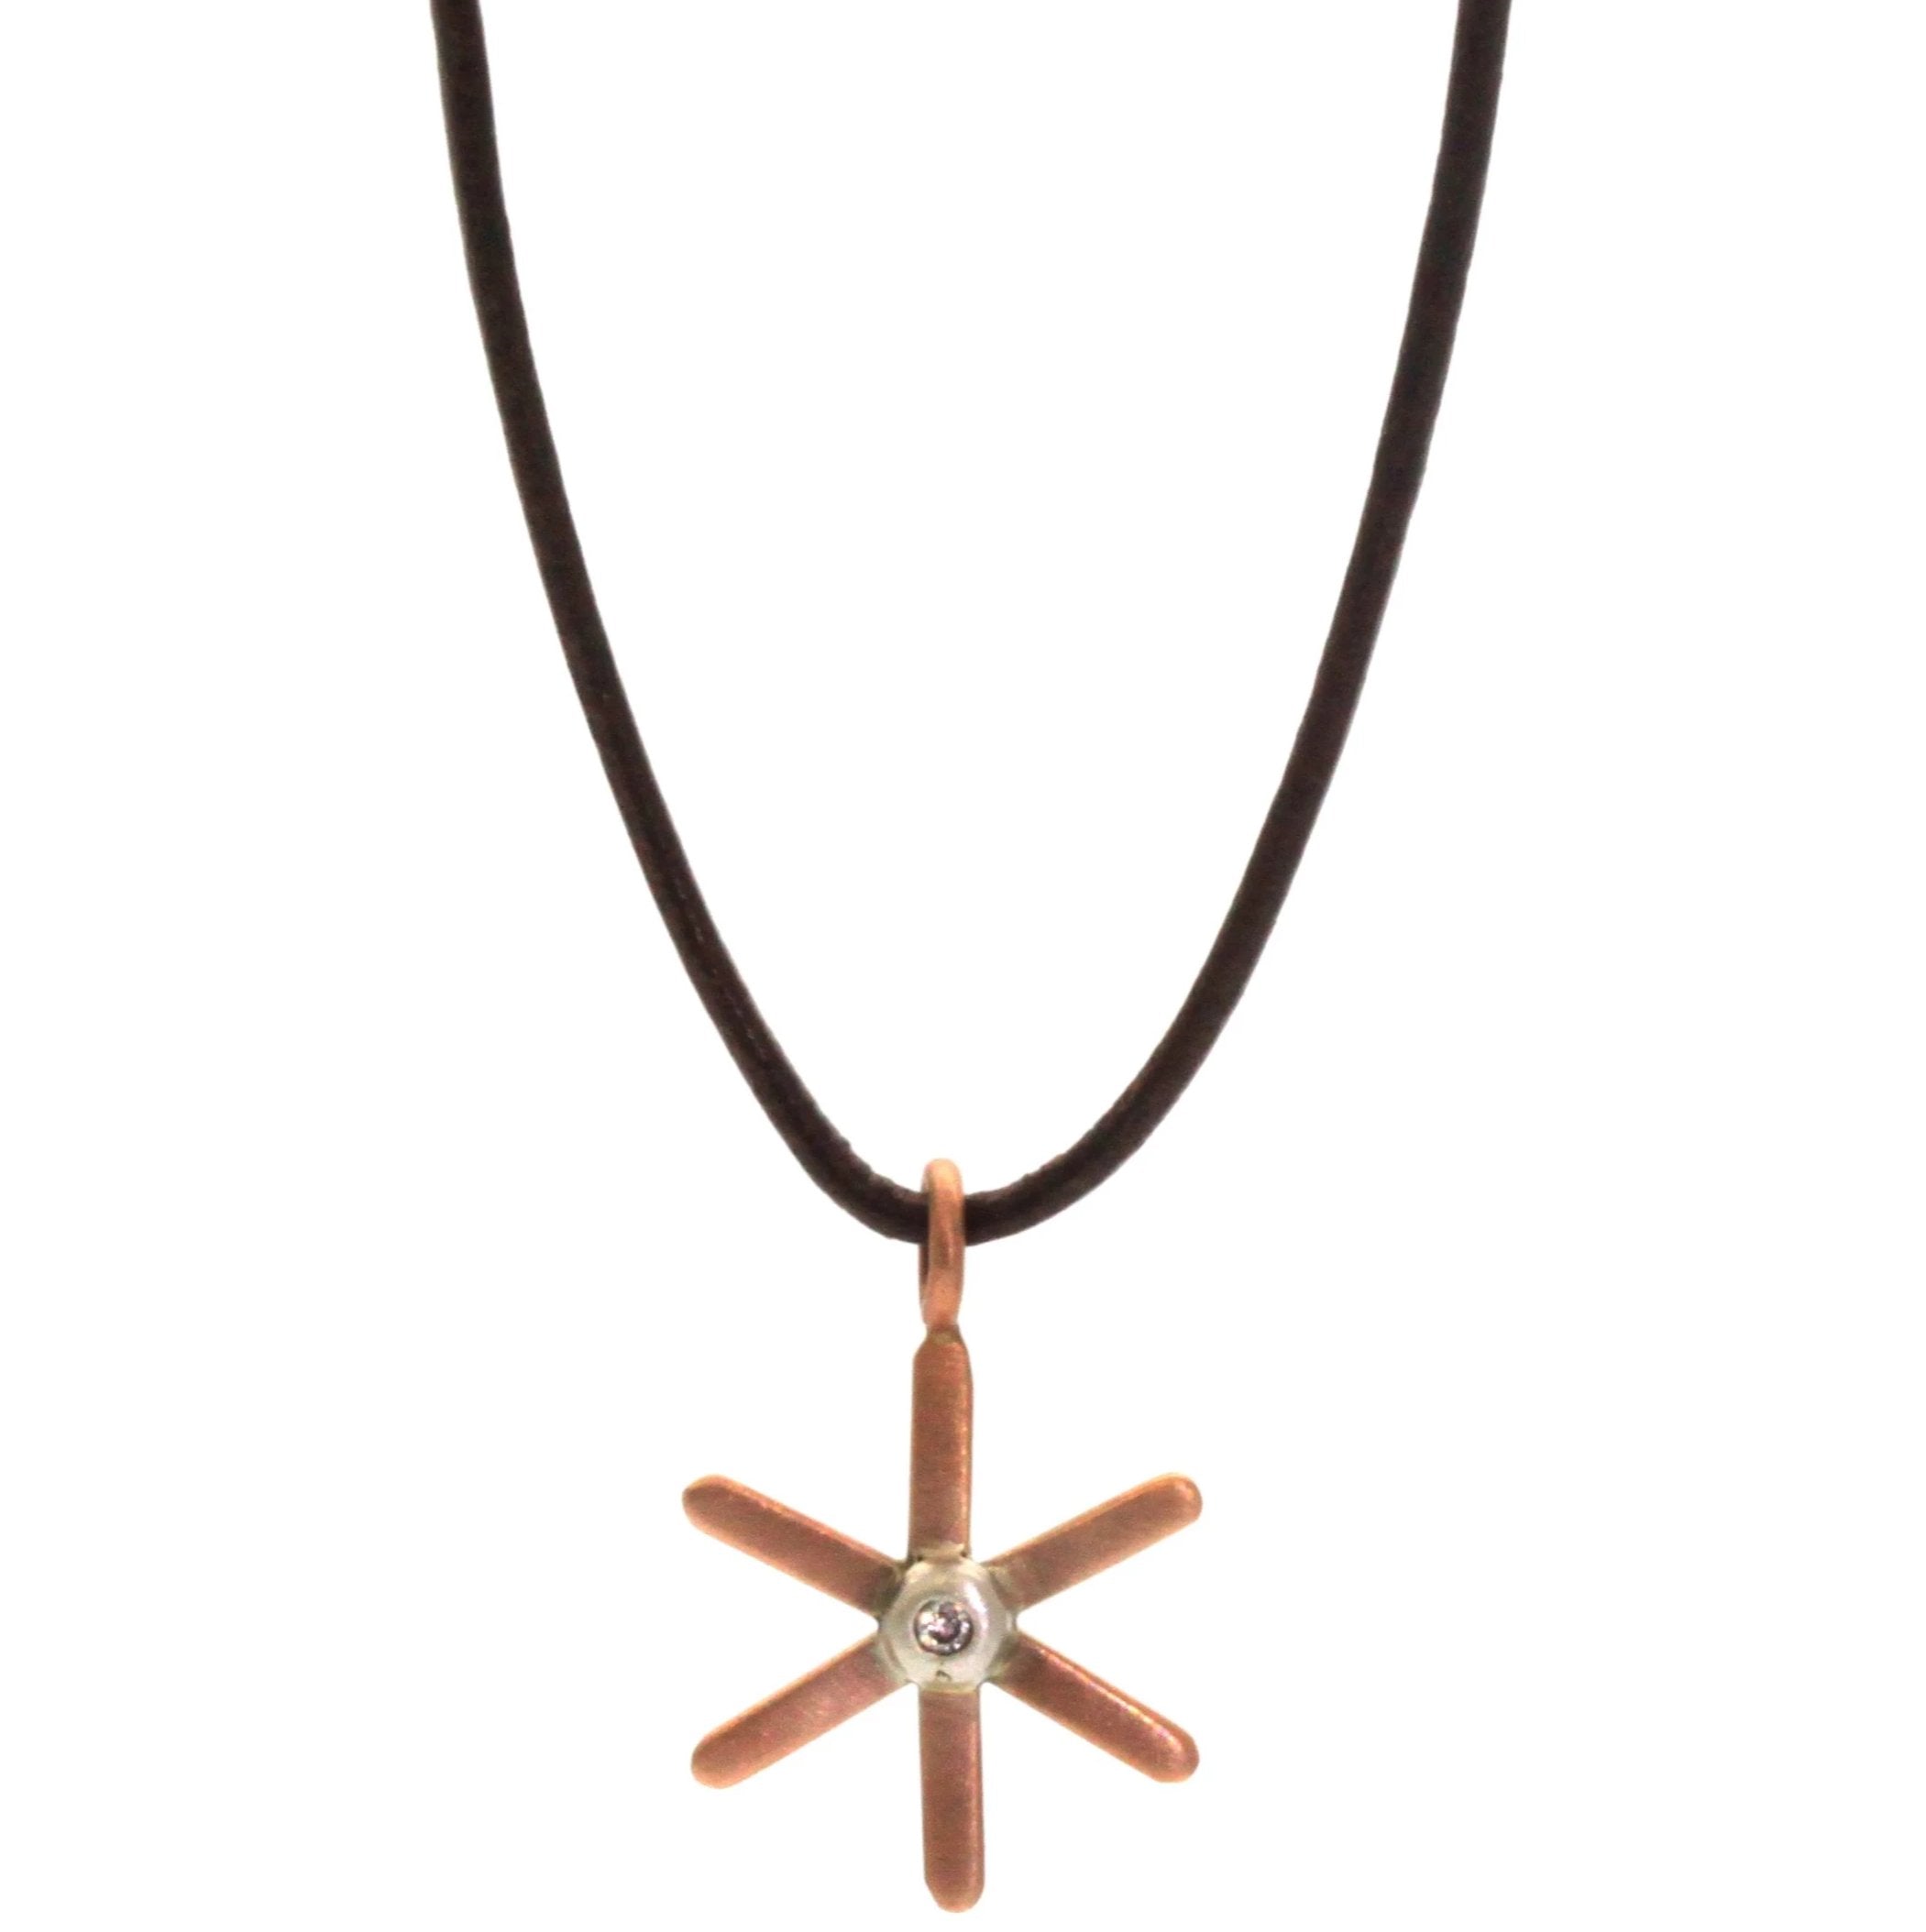 This Gold Starburst Necklace from Rebecca Lankford is a sweet pop of gold for everyone from children to adults! It features a gold, either rose or yellow, starburst pendant with a small diamond bezel set in white gold in the center. 